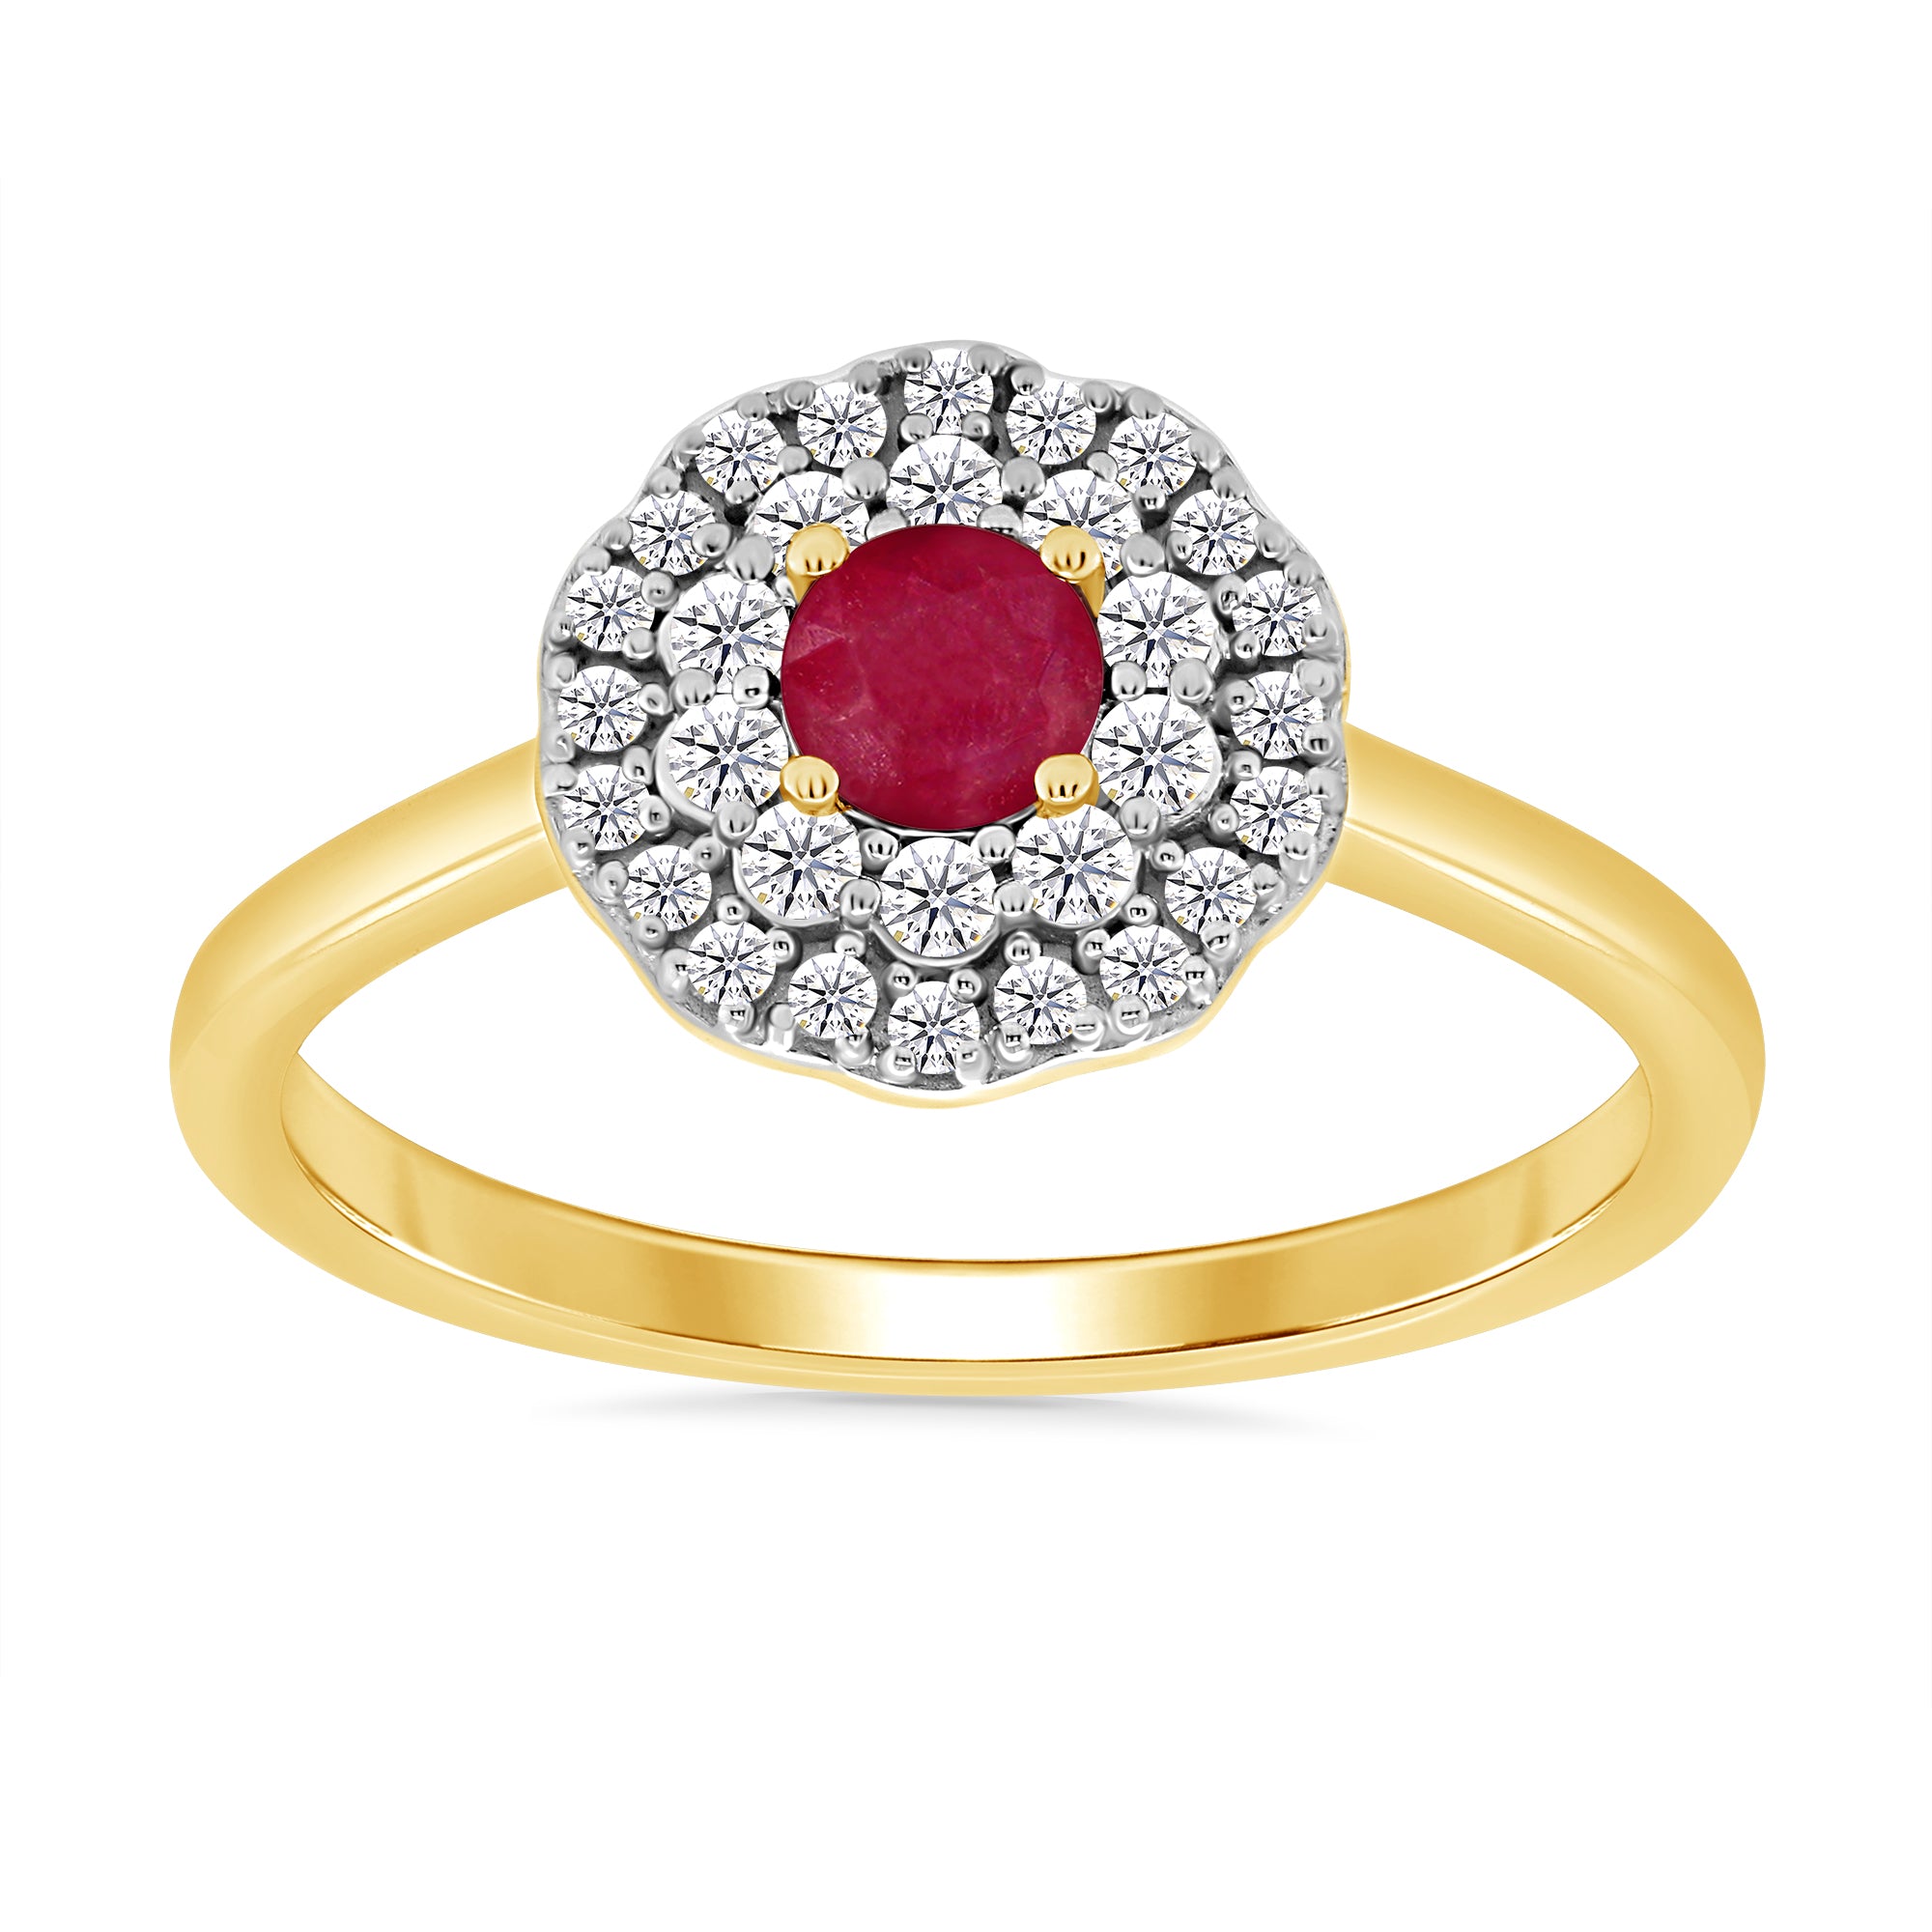 9ct gold 4mm ruby & two row diamond cluster ring 0.25ct